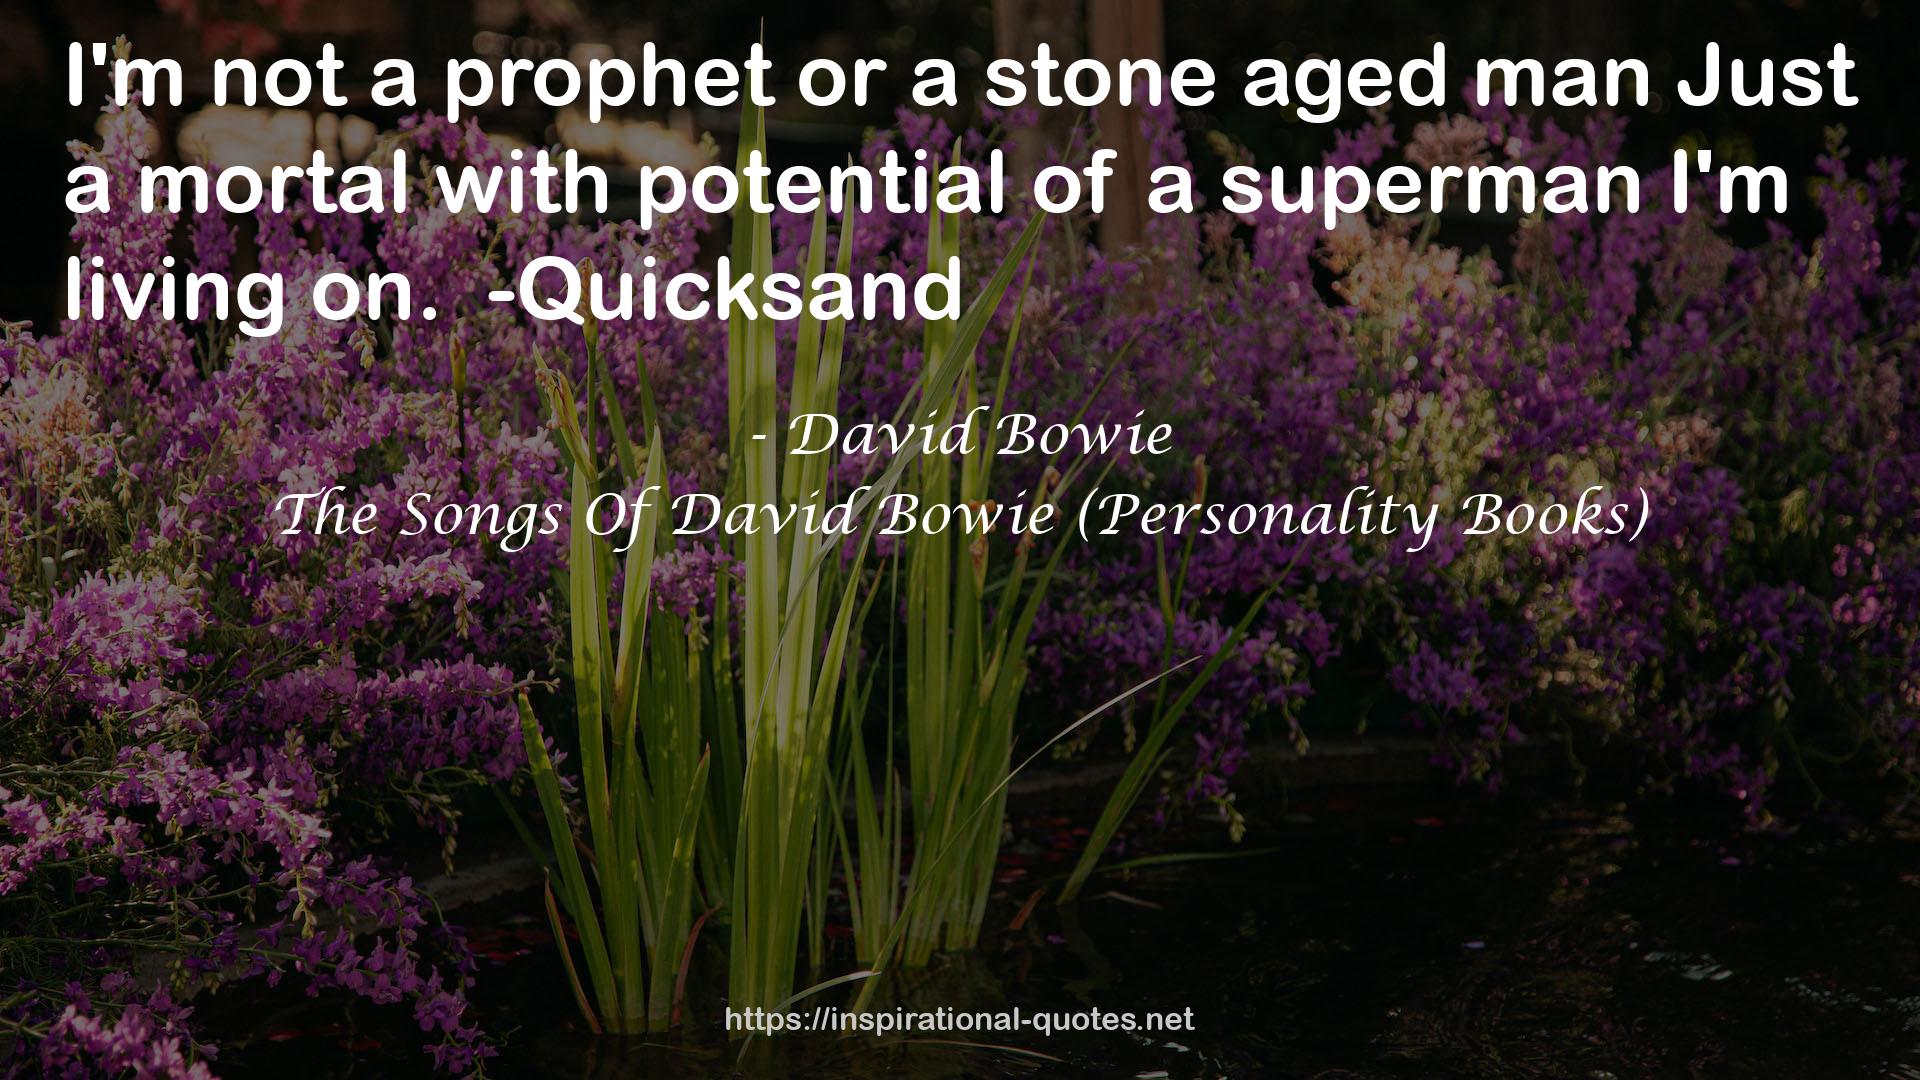 The Songs Of David Bowie (Personality Books) QUOTES